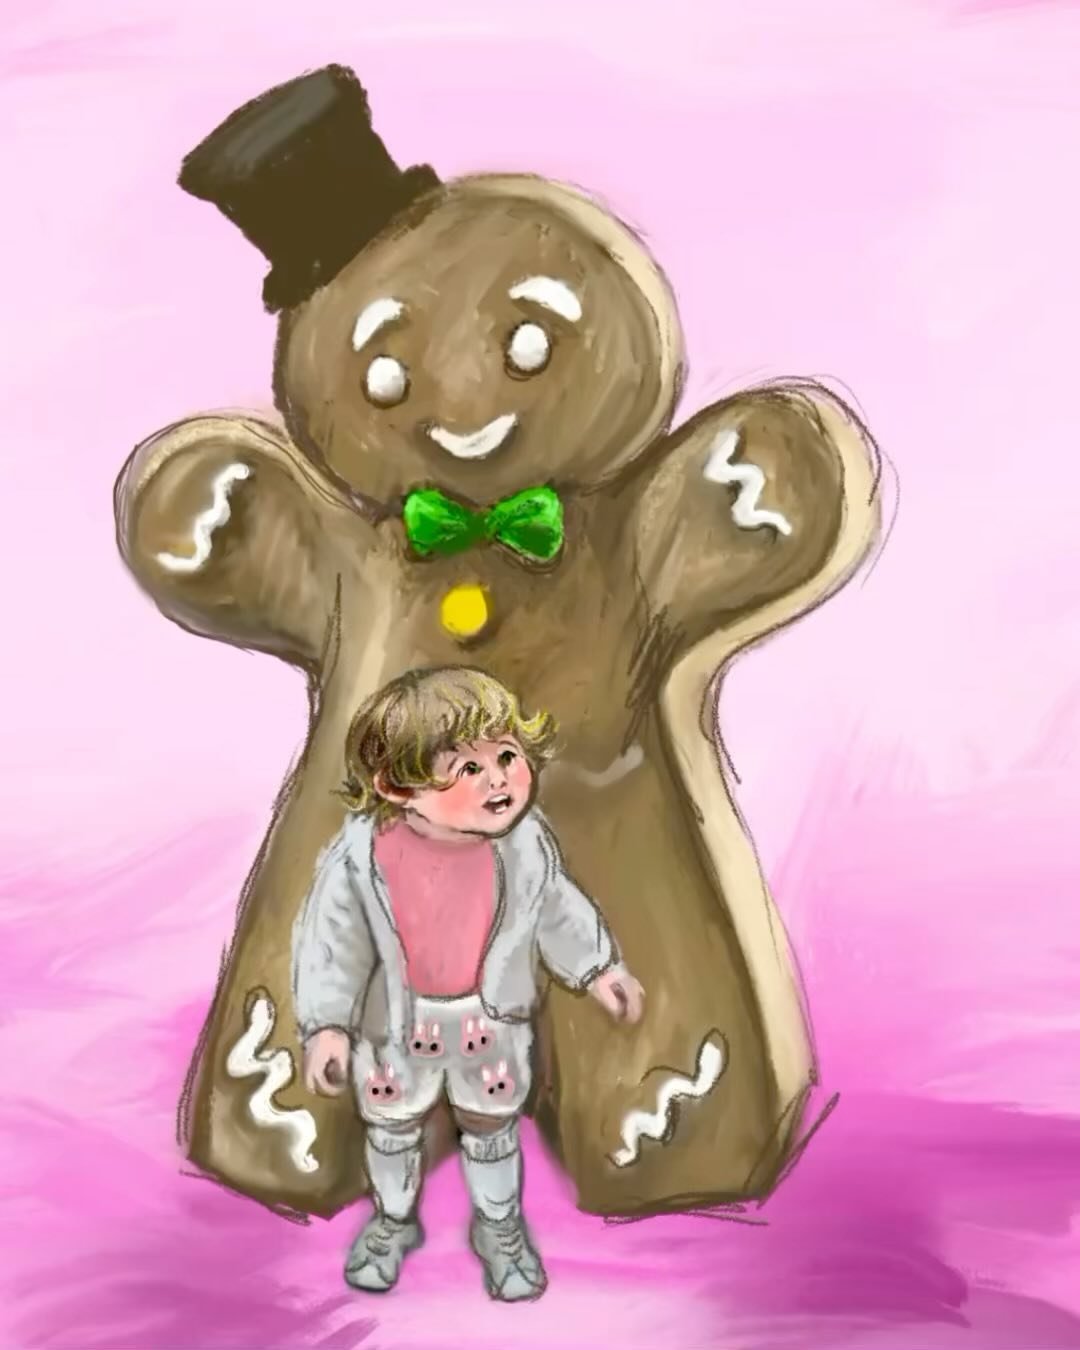 Gingerbread Hug 

&lsquo;Tis the season to be jolly&rsquo;.. Sightings in shopping centers. Wishing you all some festive cheer, especially anyone in need of a hug&hellip; with so many dire situations out there right now&hellip; a big warm gingery cin